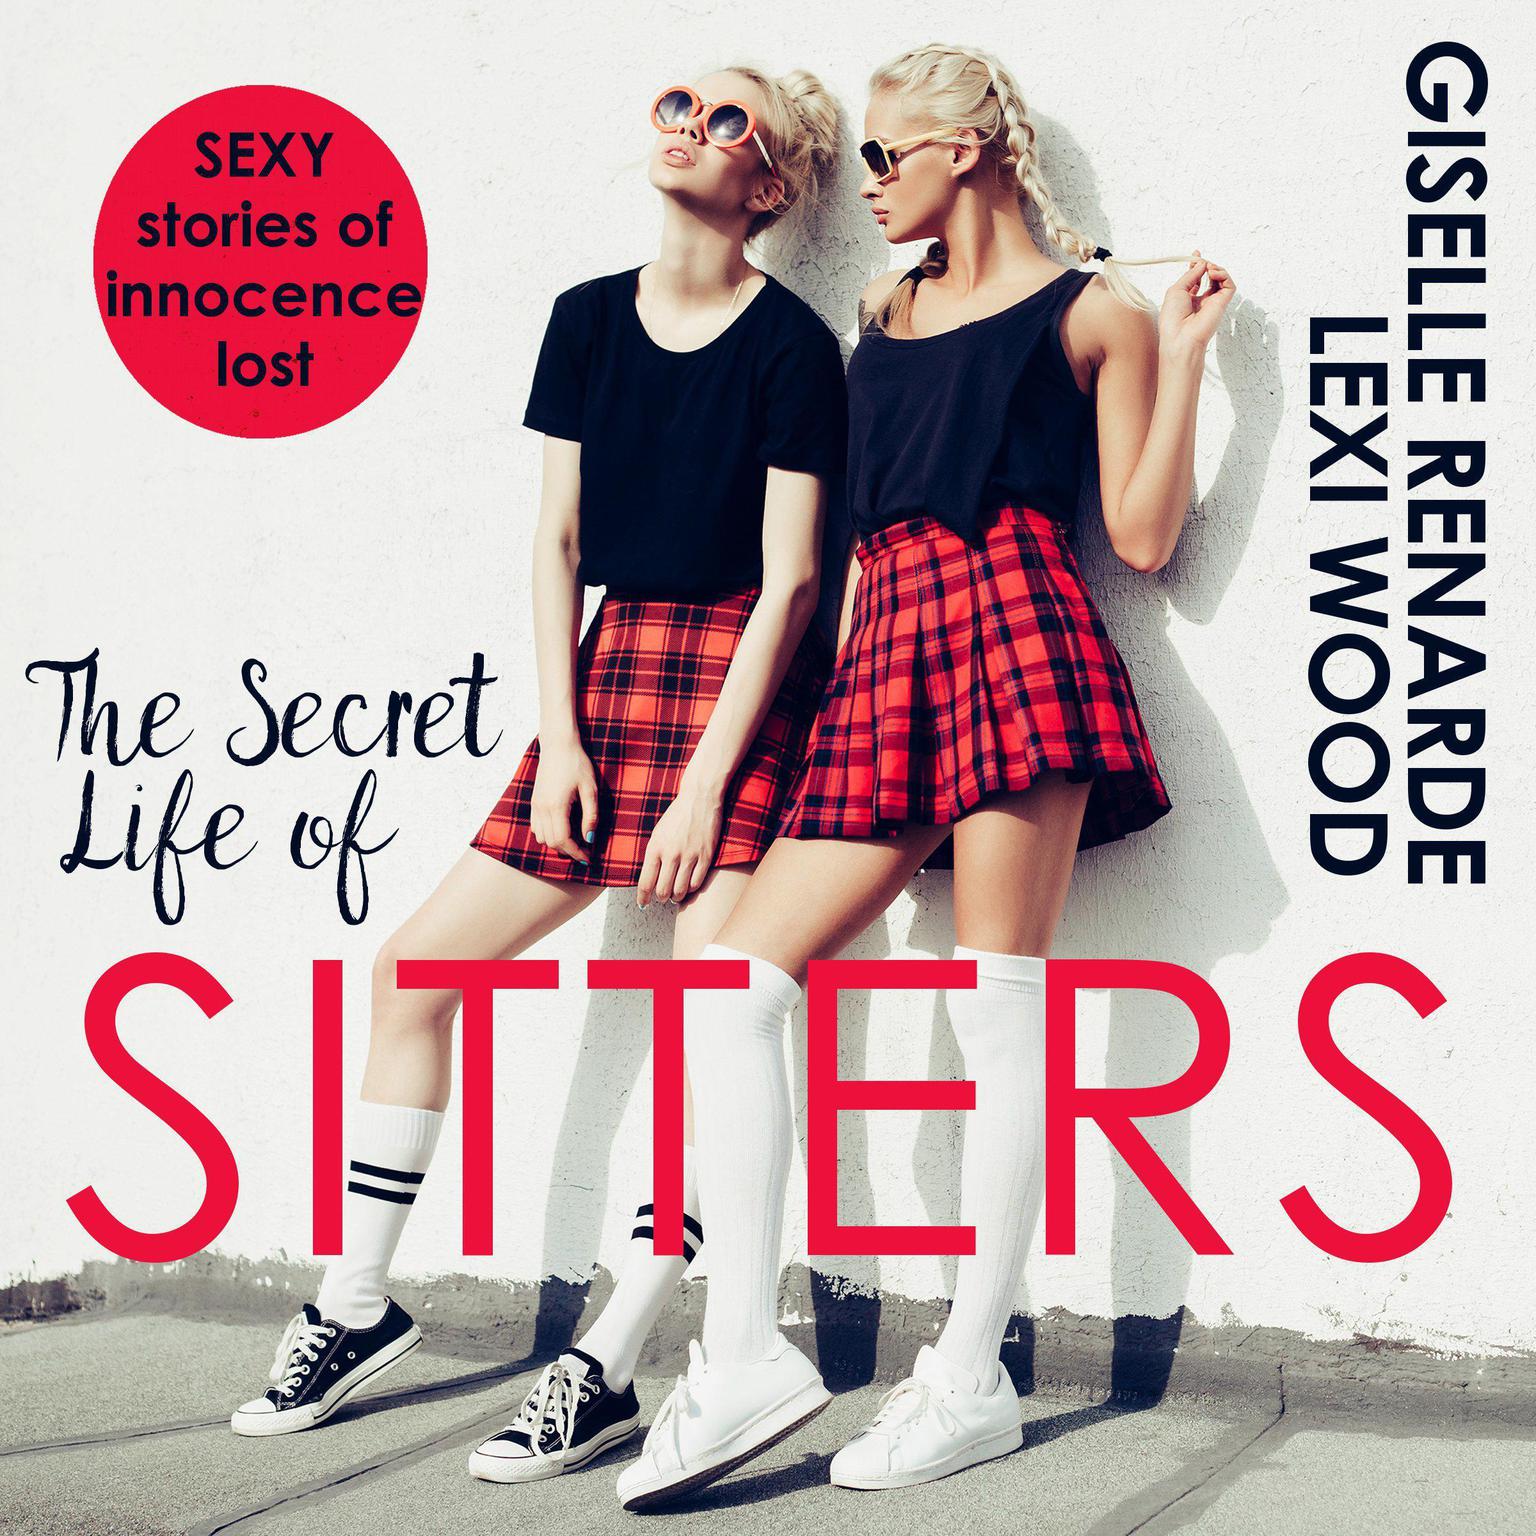 The Secret Life of Sitters (Abridged): Sexy Stories of Innocence Lost Audiobook, by Giselle Renarde